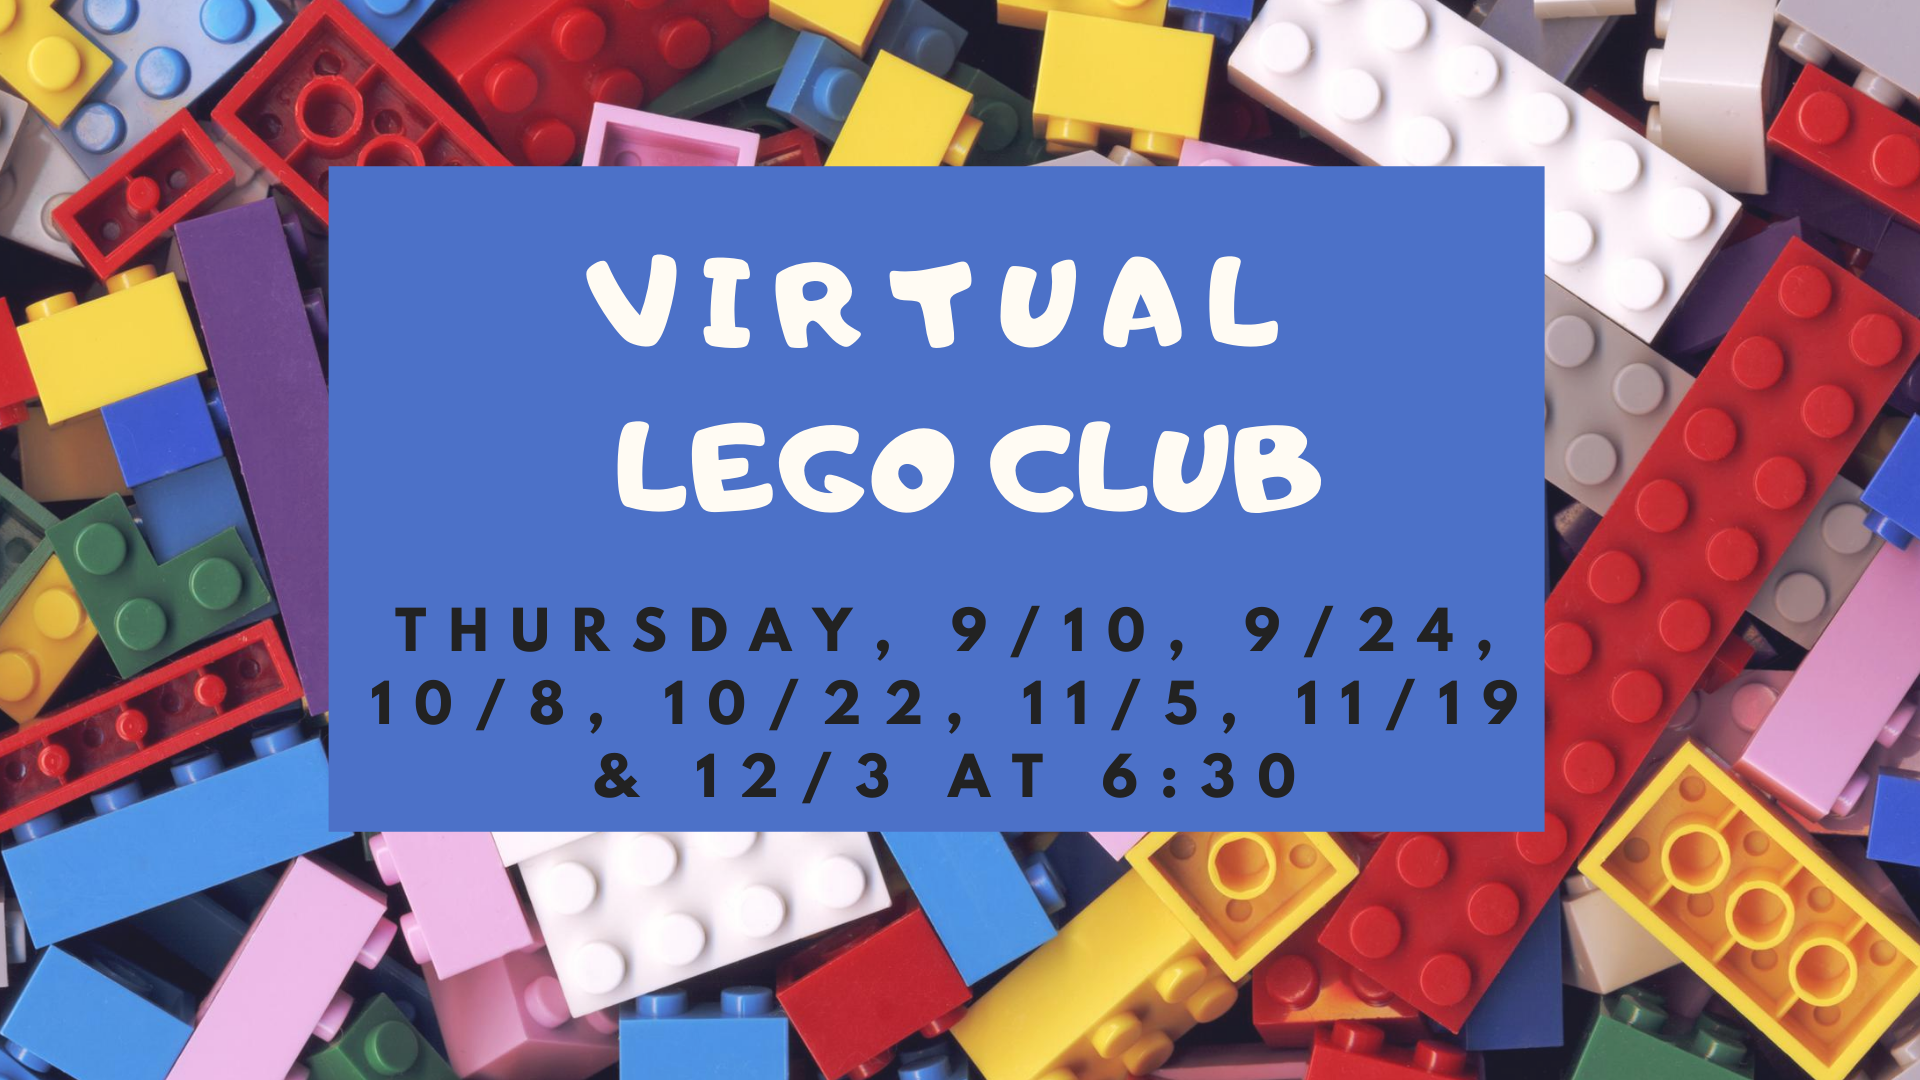 Ad for Lego Club with a photo of Lego bricks in the background.